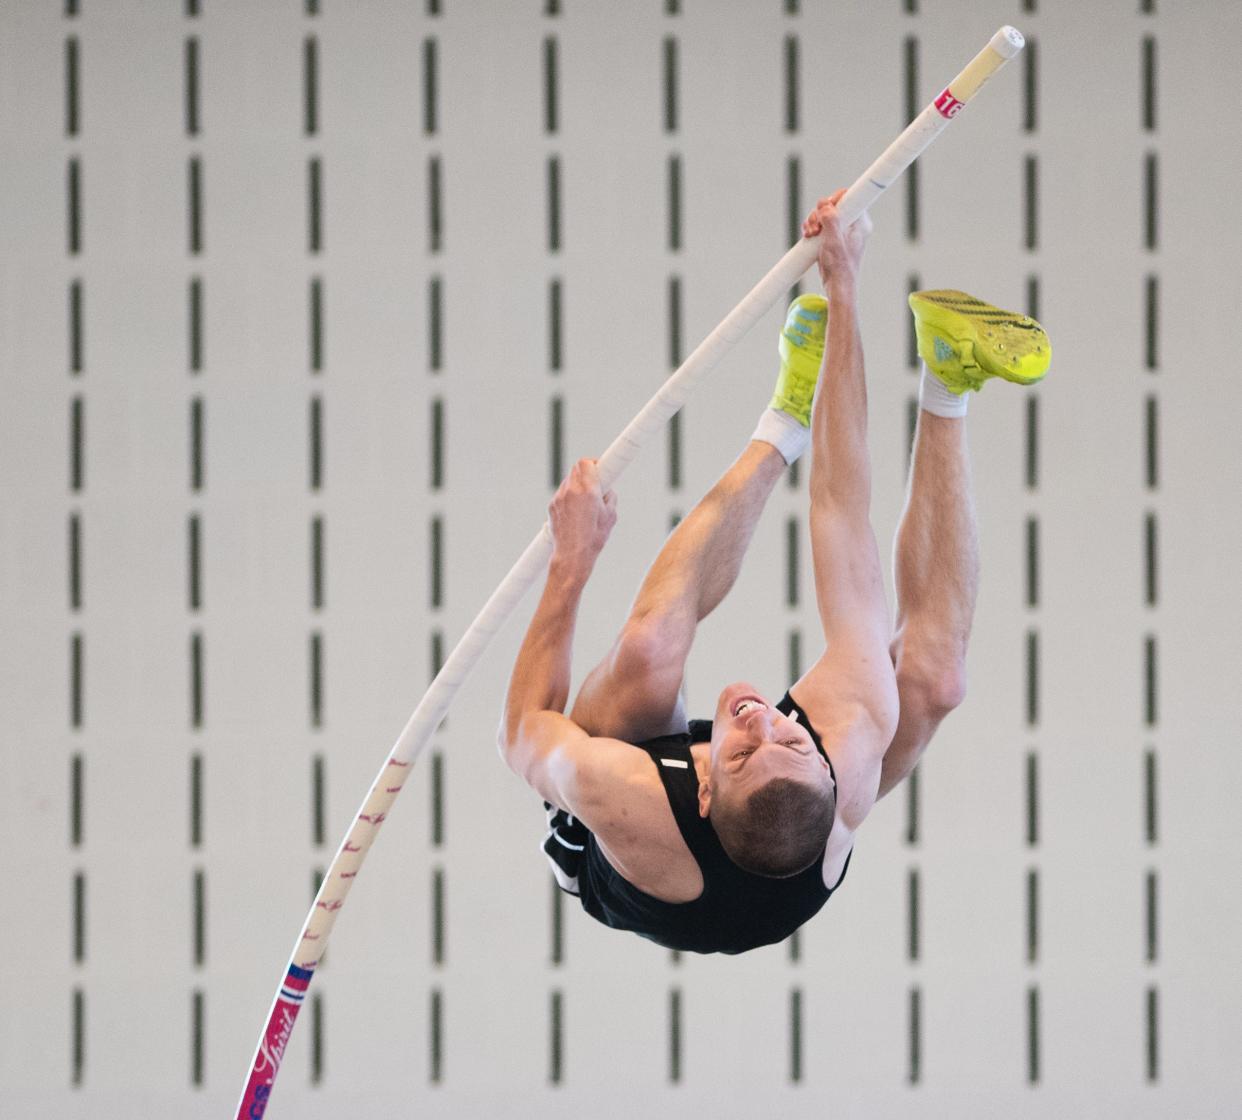 Dylan Garretson broke his own school record in the pole vault over the weekend.